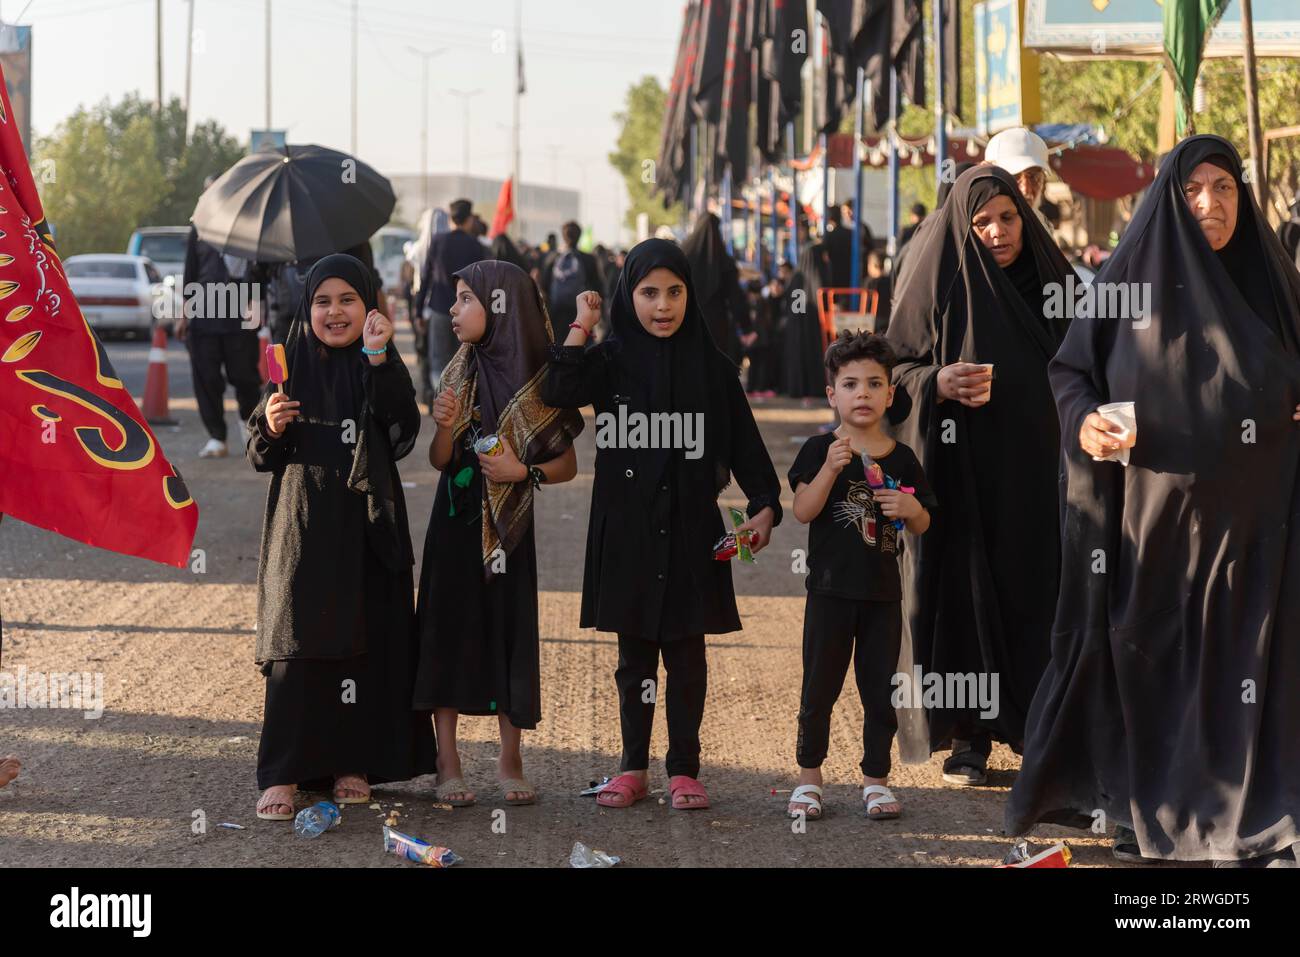 Iraqi Shia girls shout religious slogans as Shia Muslim pilgrims march from Najaf towards Shrine city of Karbala. Every year, millions of Shia Muslims and some from other faiths undertake a 20-day pilgrimage on foot from various cities in Iraq and Iran to the holy city of Karbala. This pilgrimage is in remembrance of Imam Hussein, the grandson of the Prophet Muhammad, who died in a battle in 680 AD. On the 40th day of mourning for Hussein, known as Arbaeen, pilgrims converge in Karbala to pay tribute at his shrine. Along the way, volunteers provide food, water, and shelter, and villagers open Stock Photo